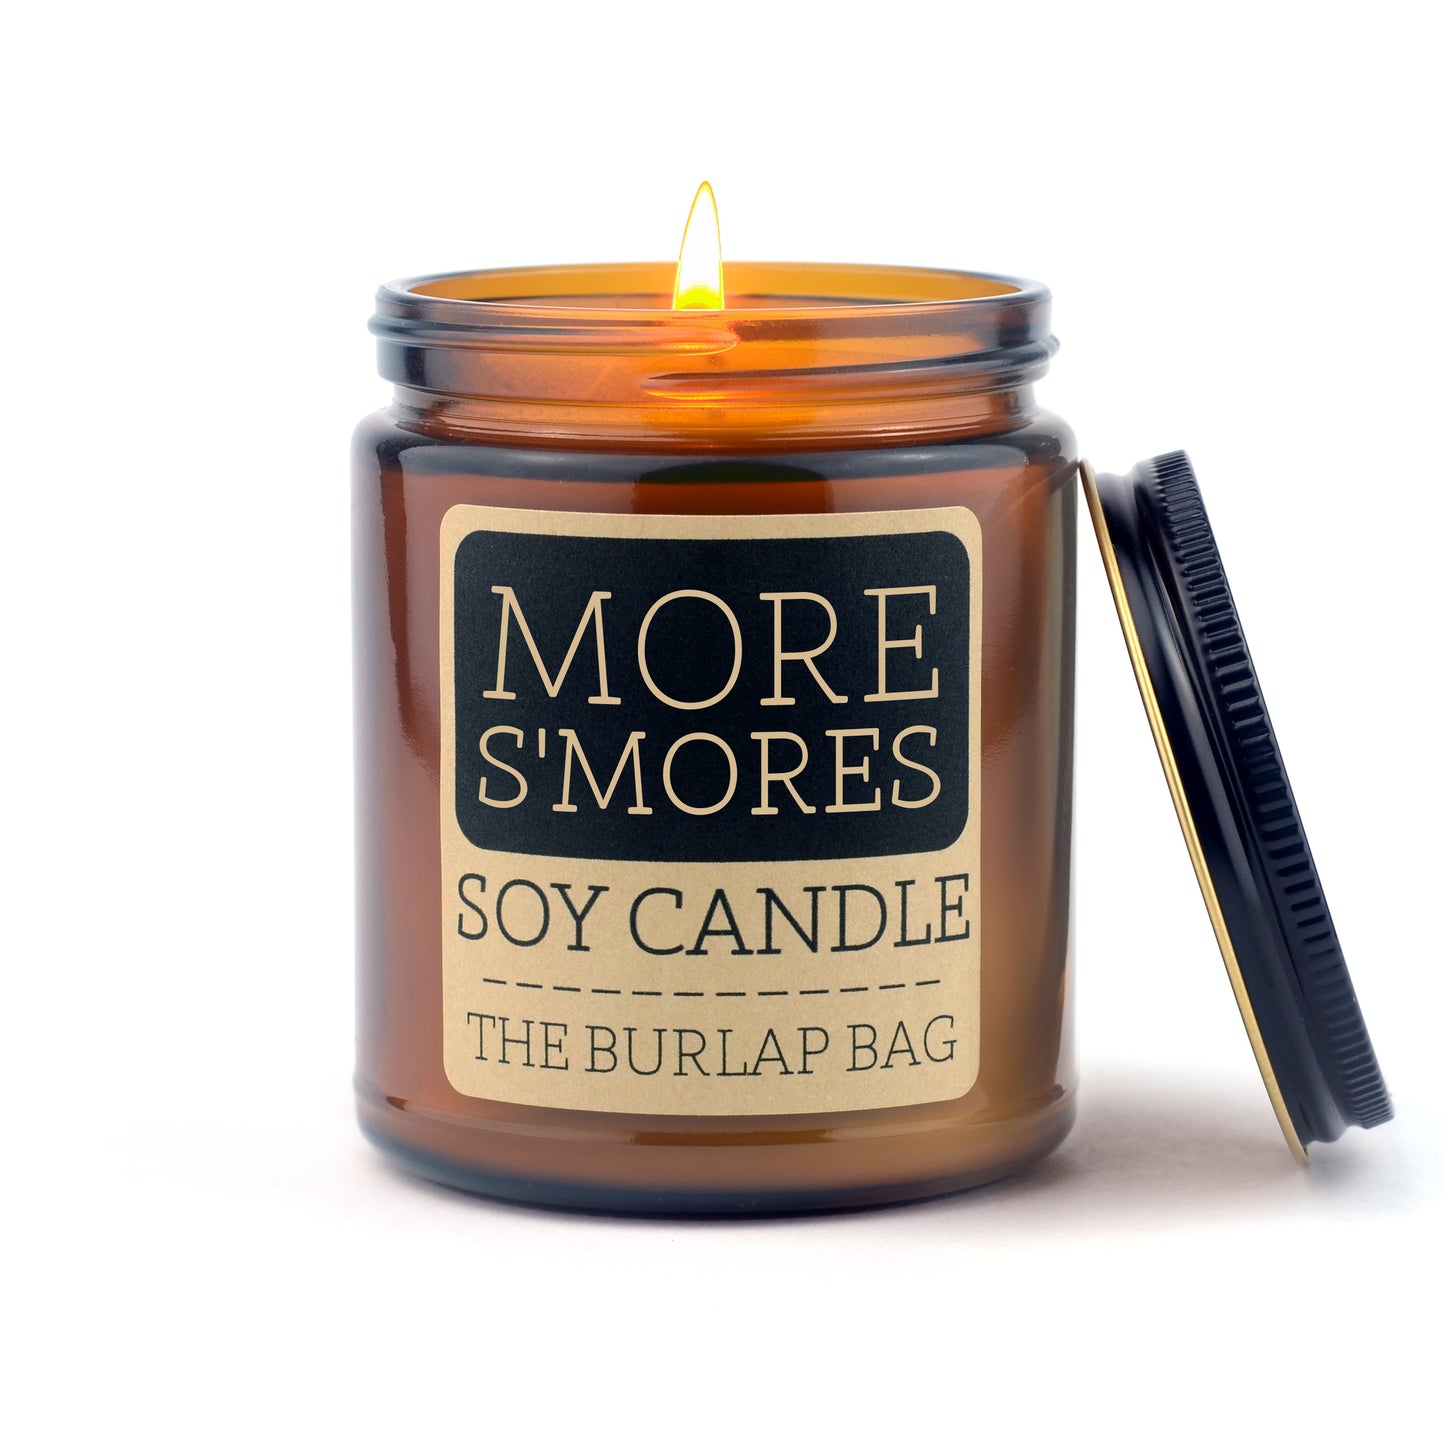 More S'mores - Soy Candle 9oz